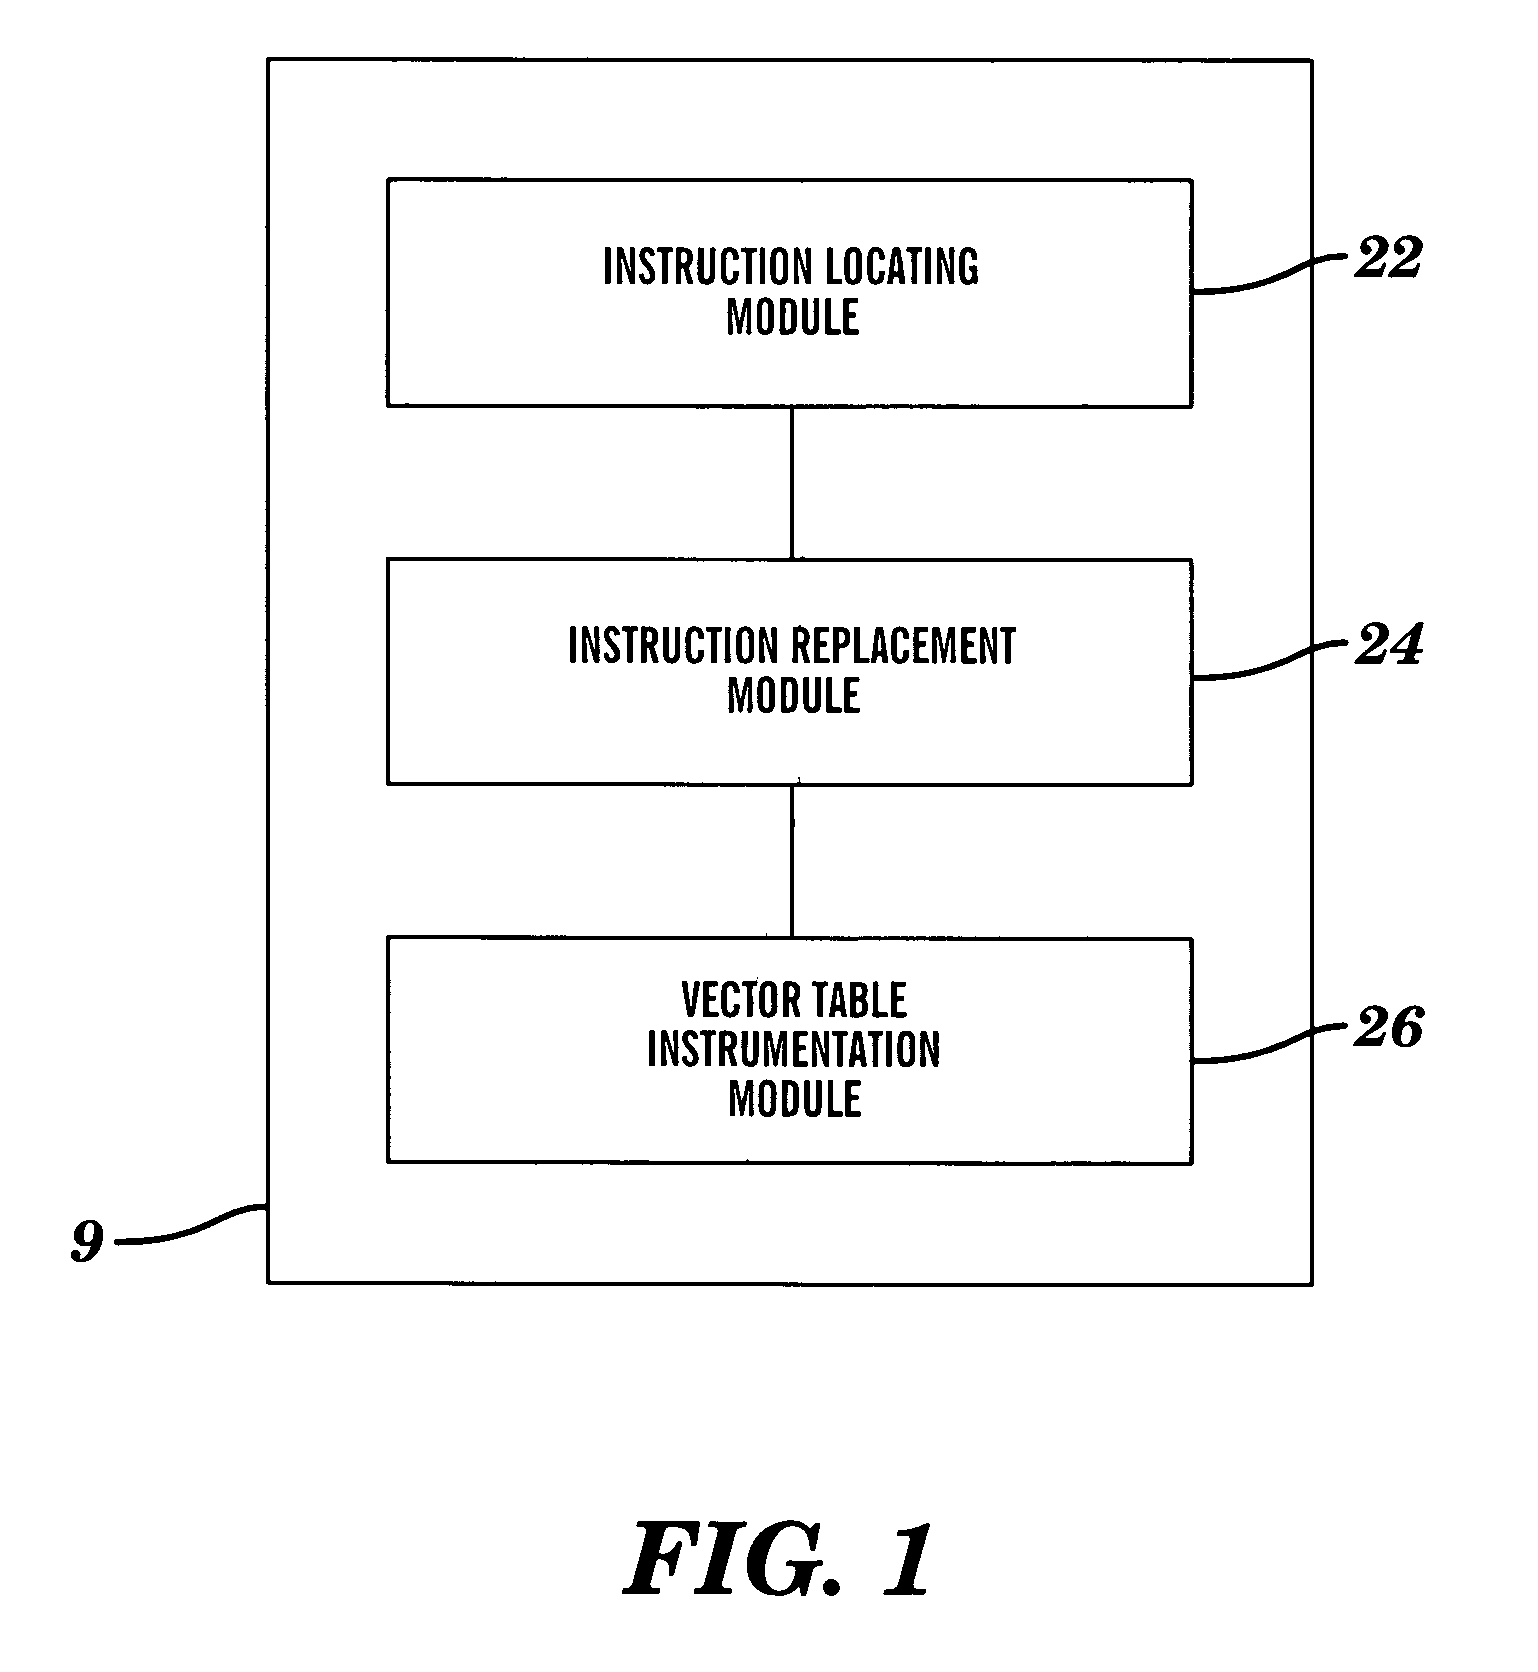 Dynamic software code instrumentation method and system